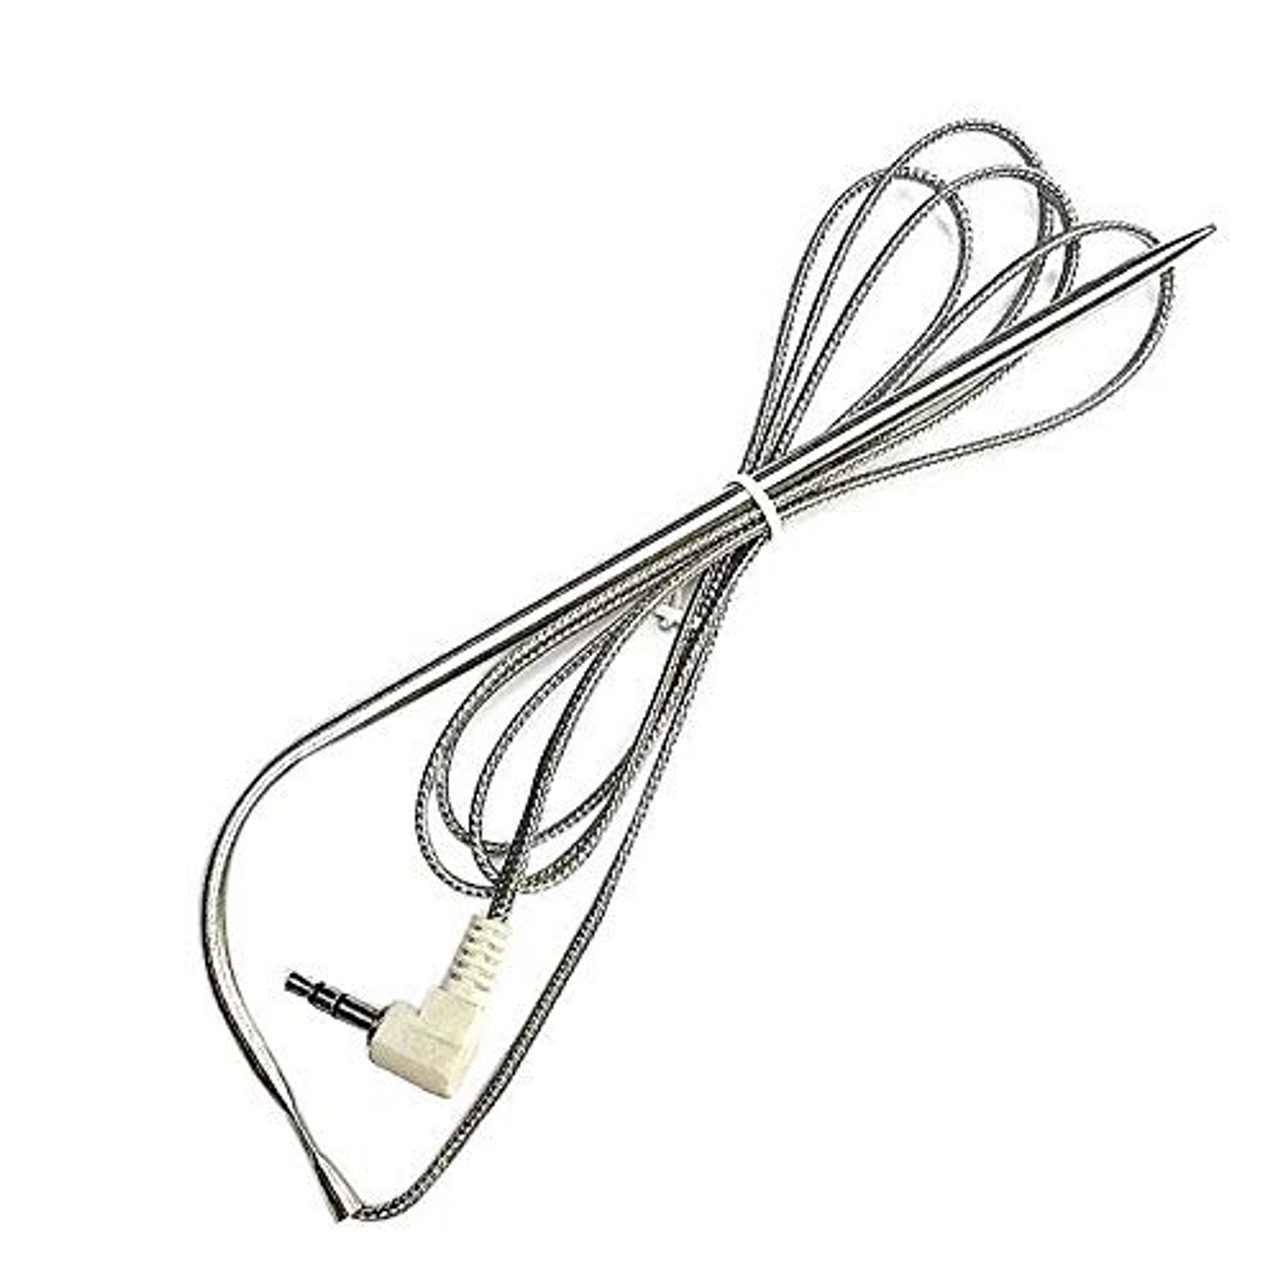 https://cdn11.bigcommerce.com/s-kk2jd0cxqh/images/stencil/1280x1280/products/14340/8060/traeger-replacement-meat-probes__60354.1648750729.png?c=1